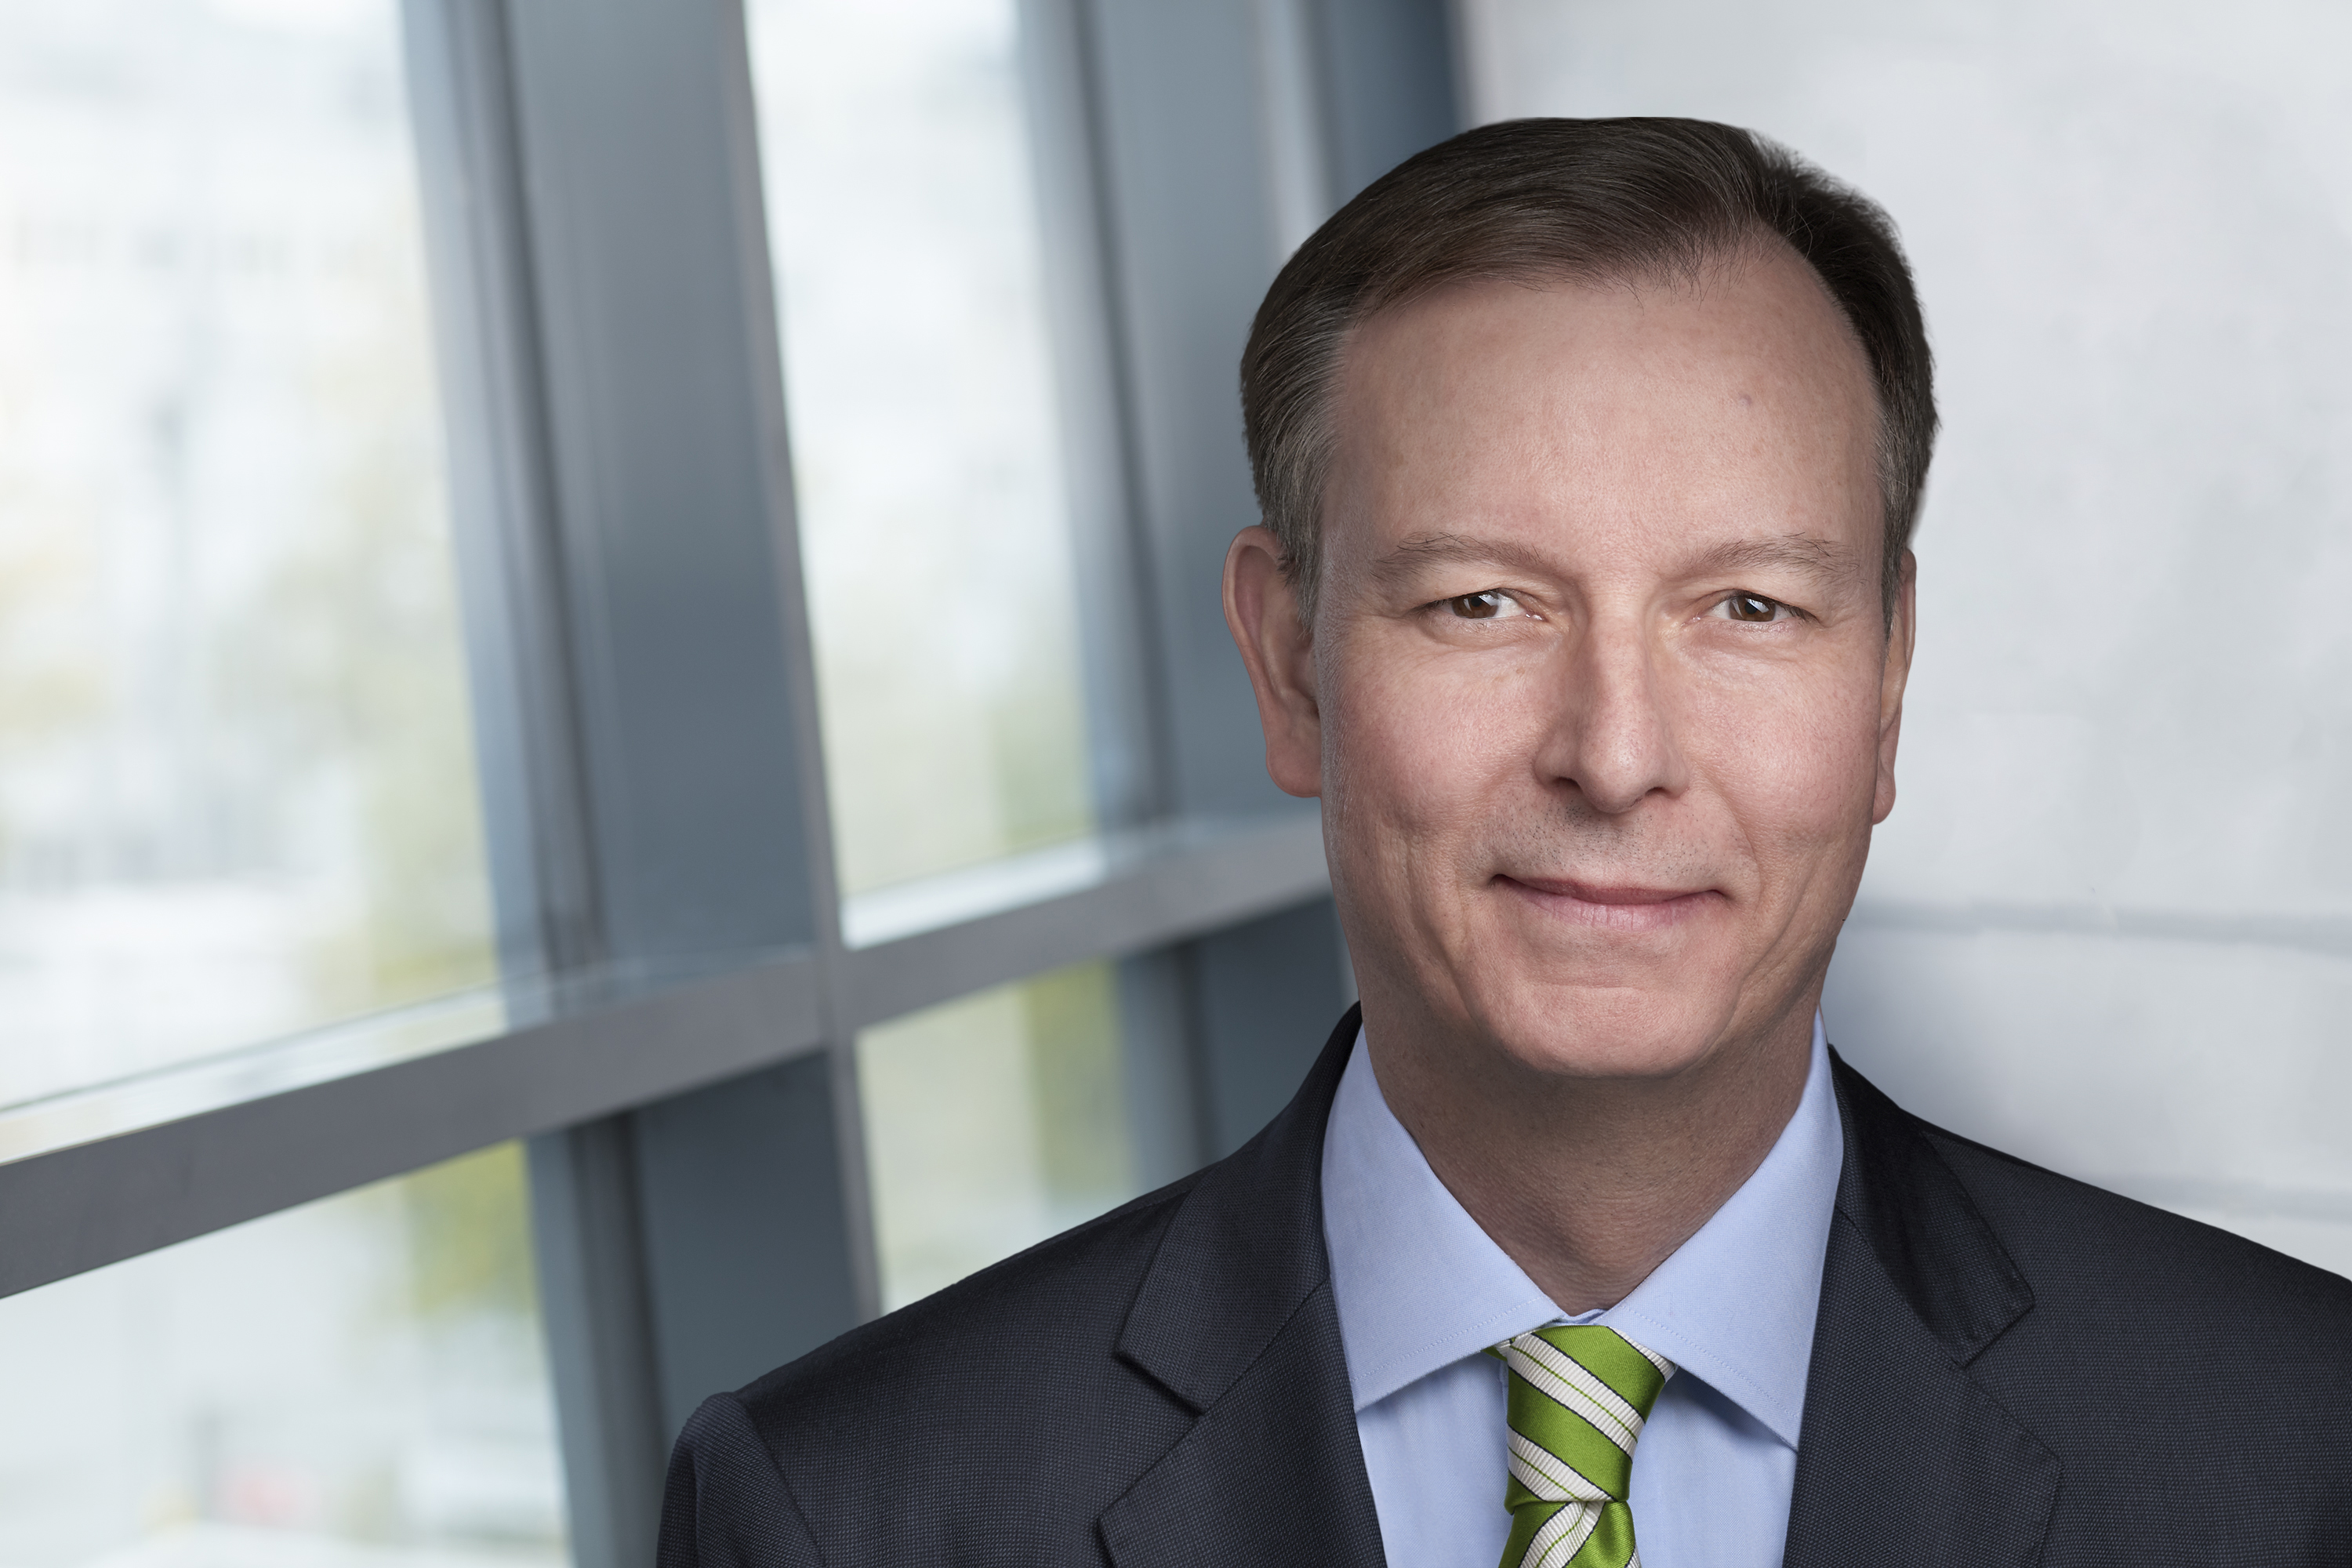 VIA Optronics is pleased to welcome our new CFO Dr. Markus Peters